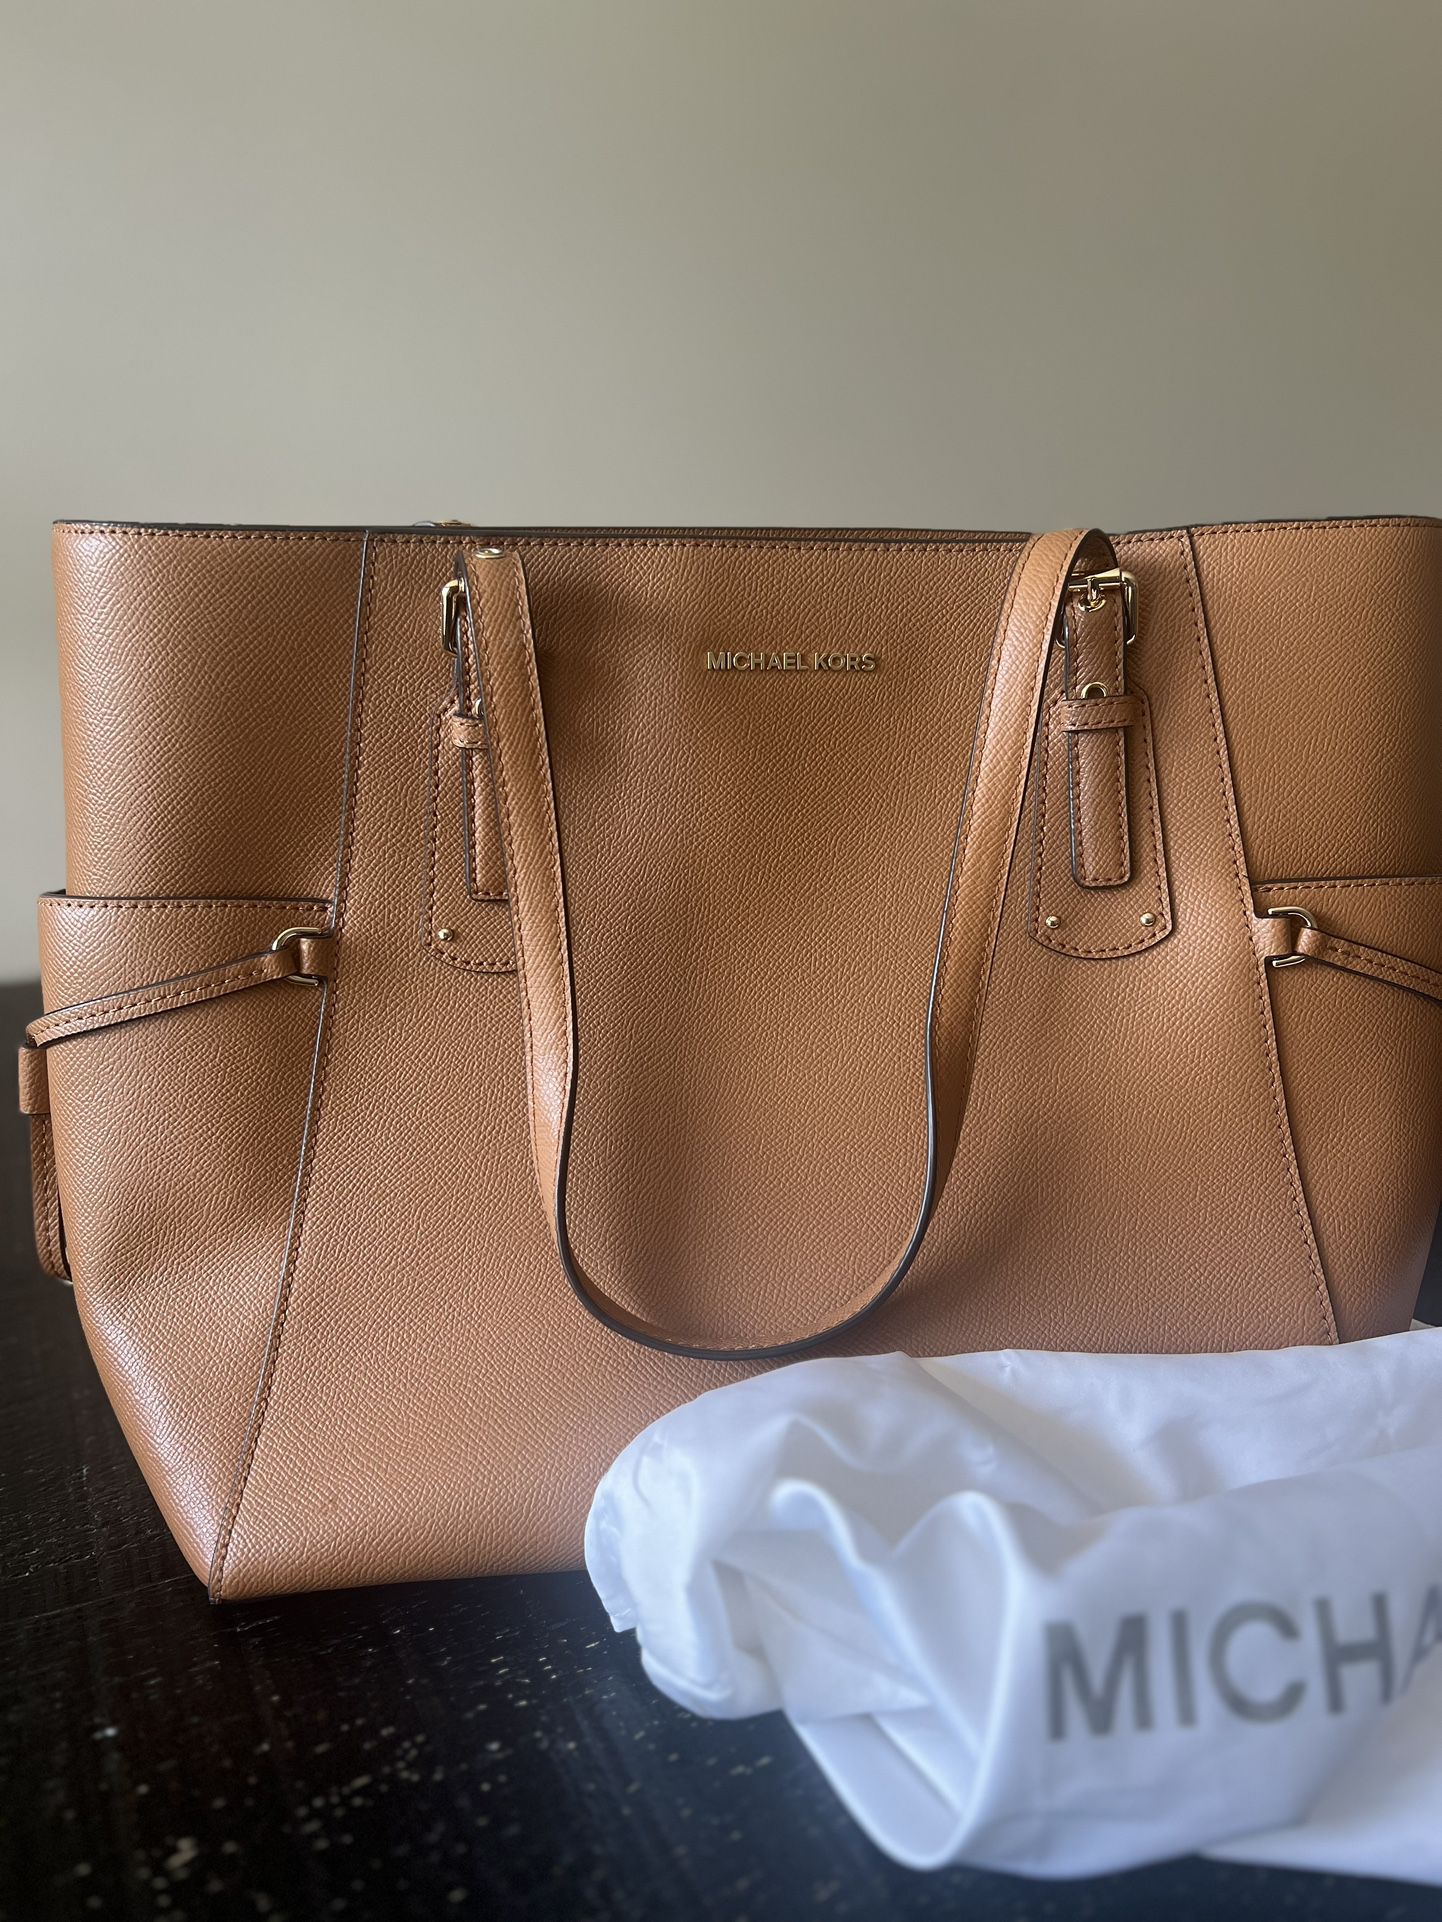 Michael Kors large leather Tote $40/OBO